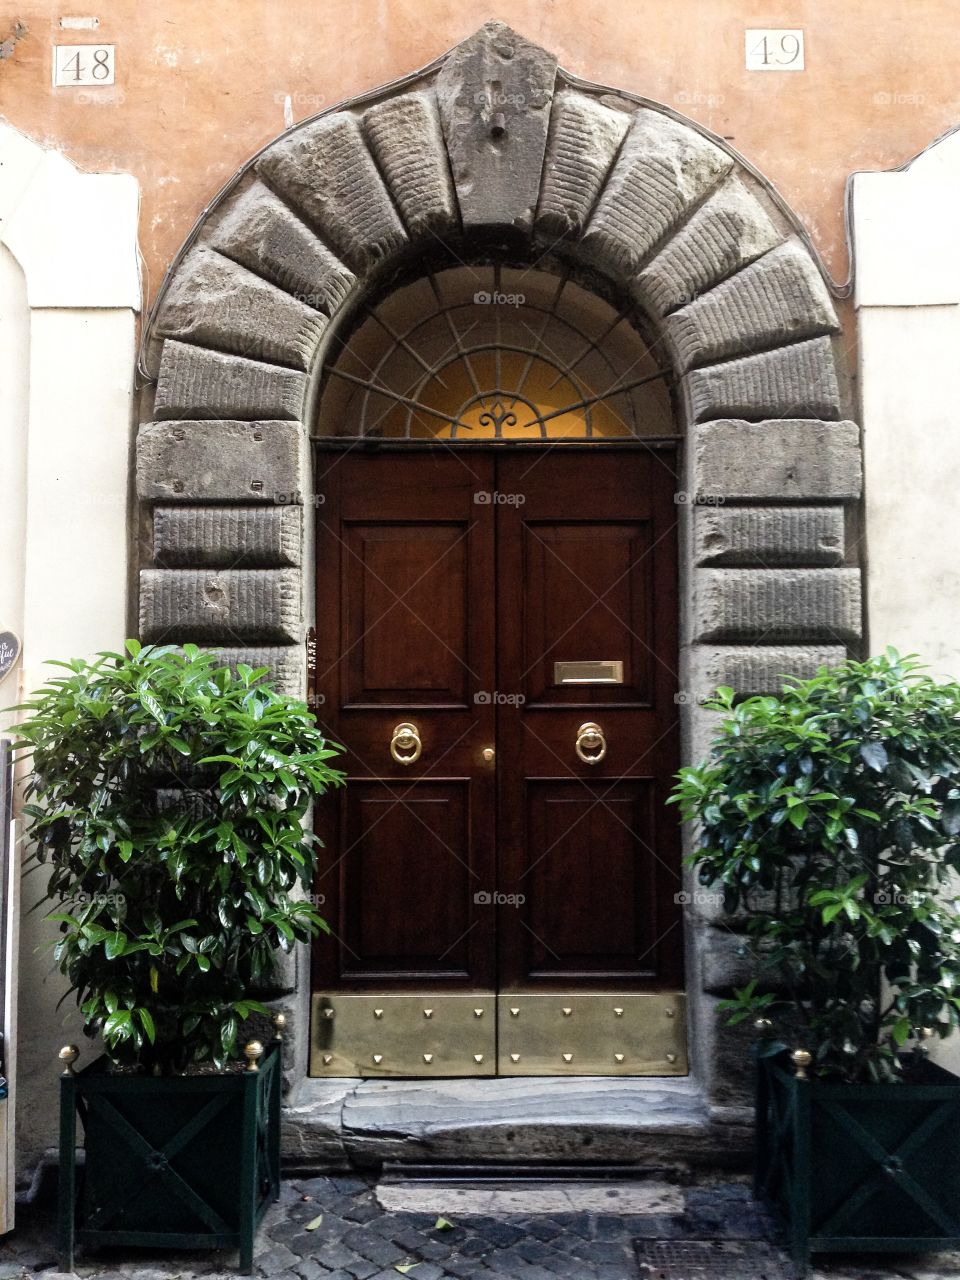 The entrance door with knock. Roma. Italy. 